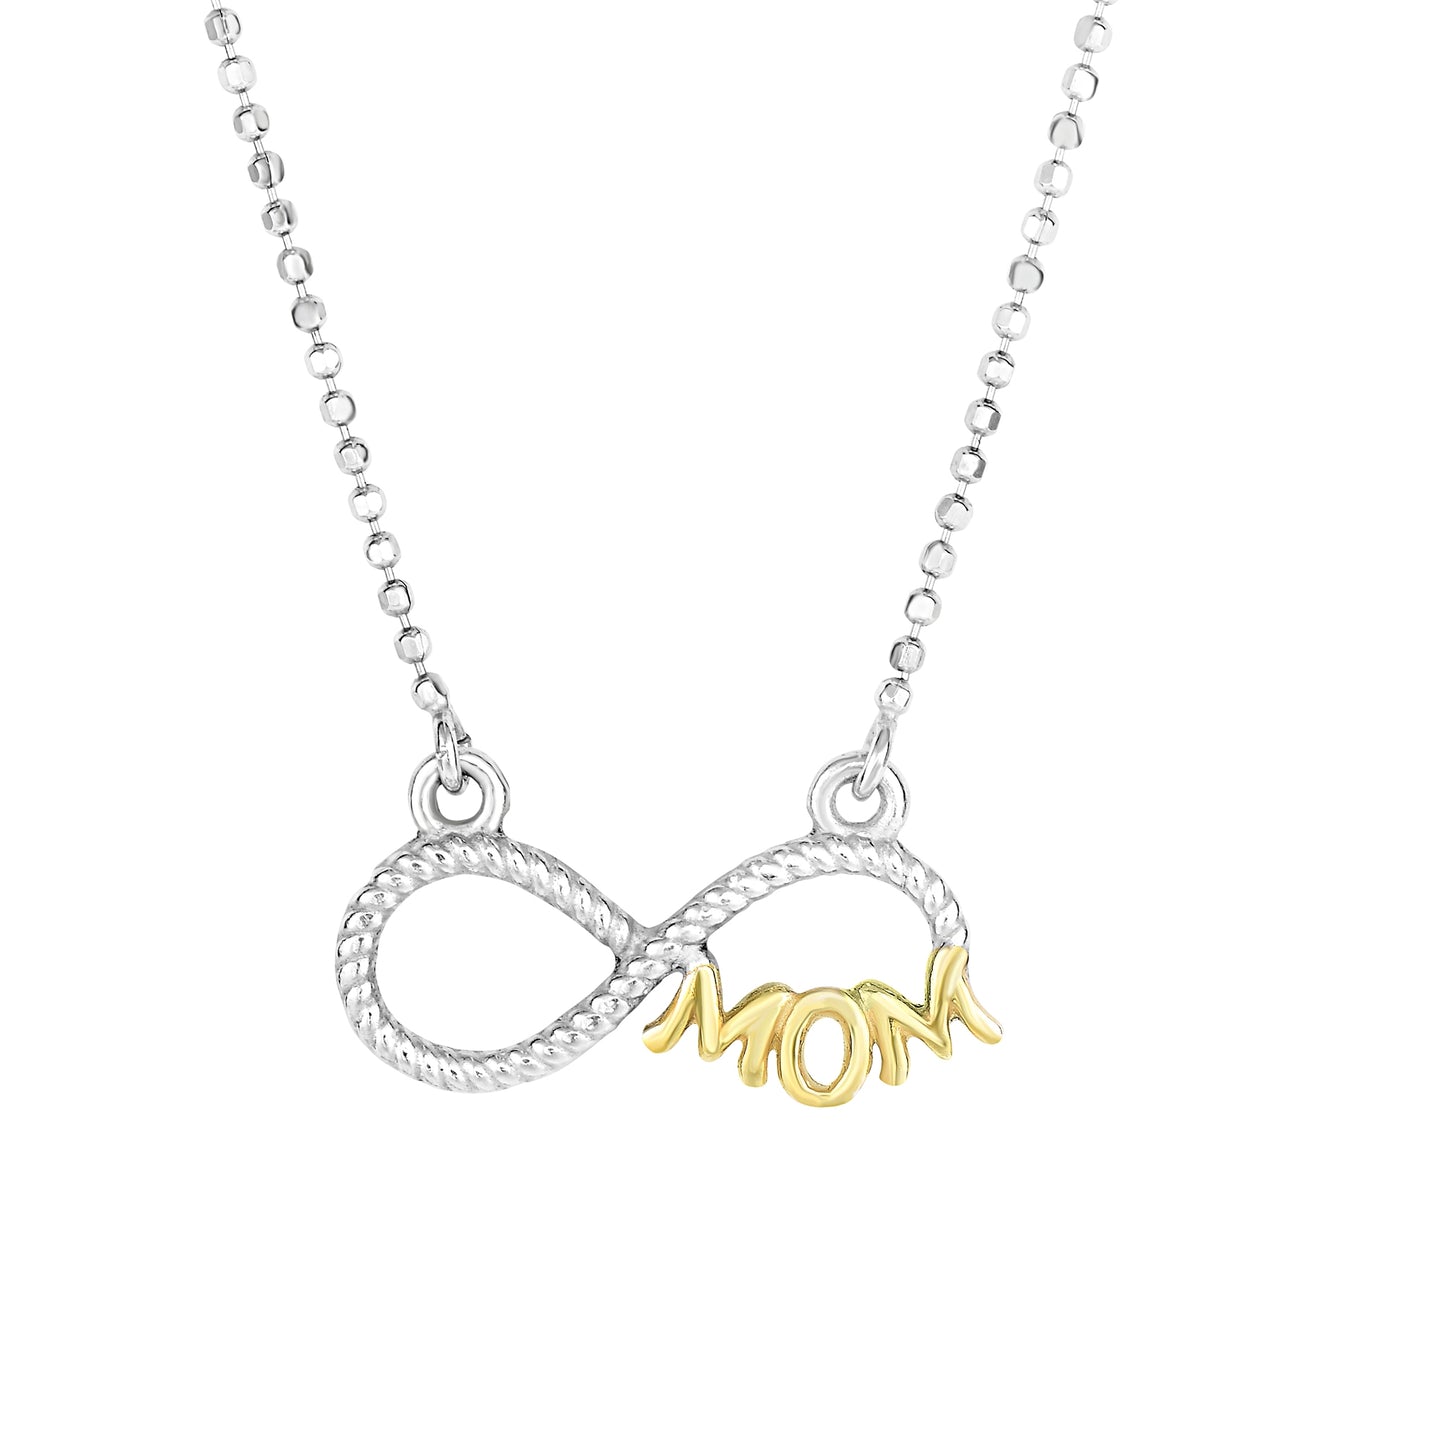 Silver Two-tone CZ Infinity Mom Necklace